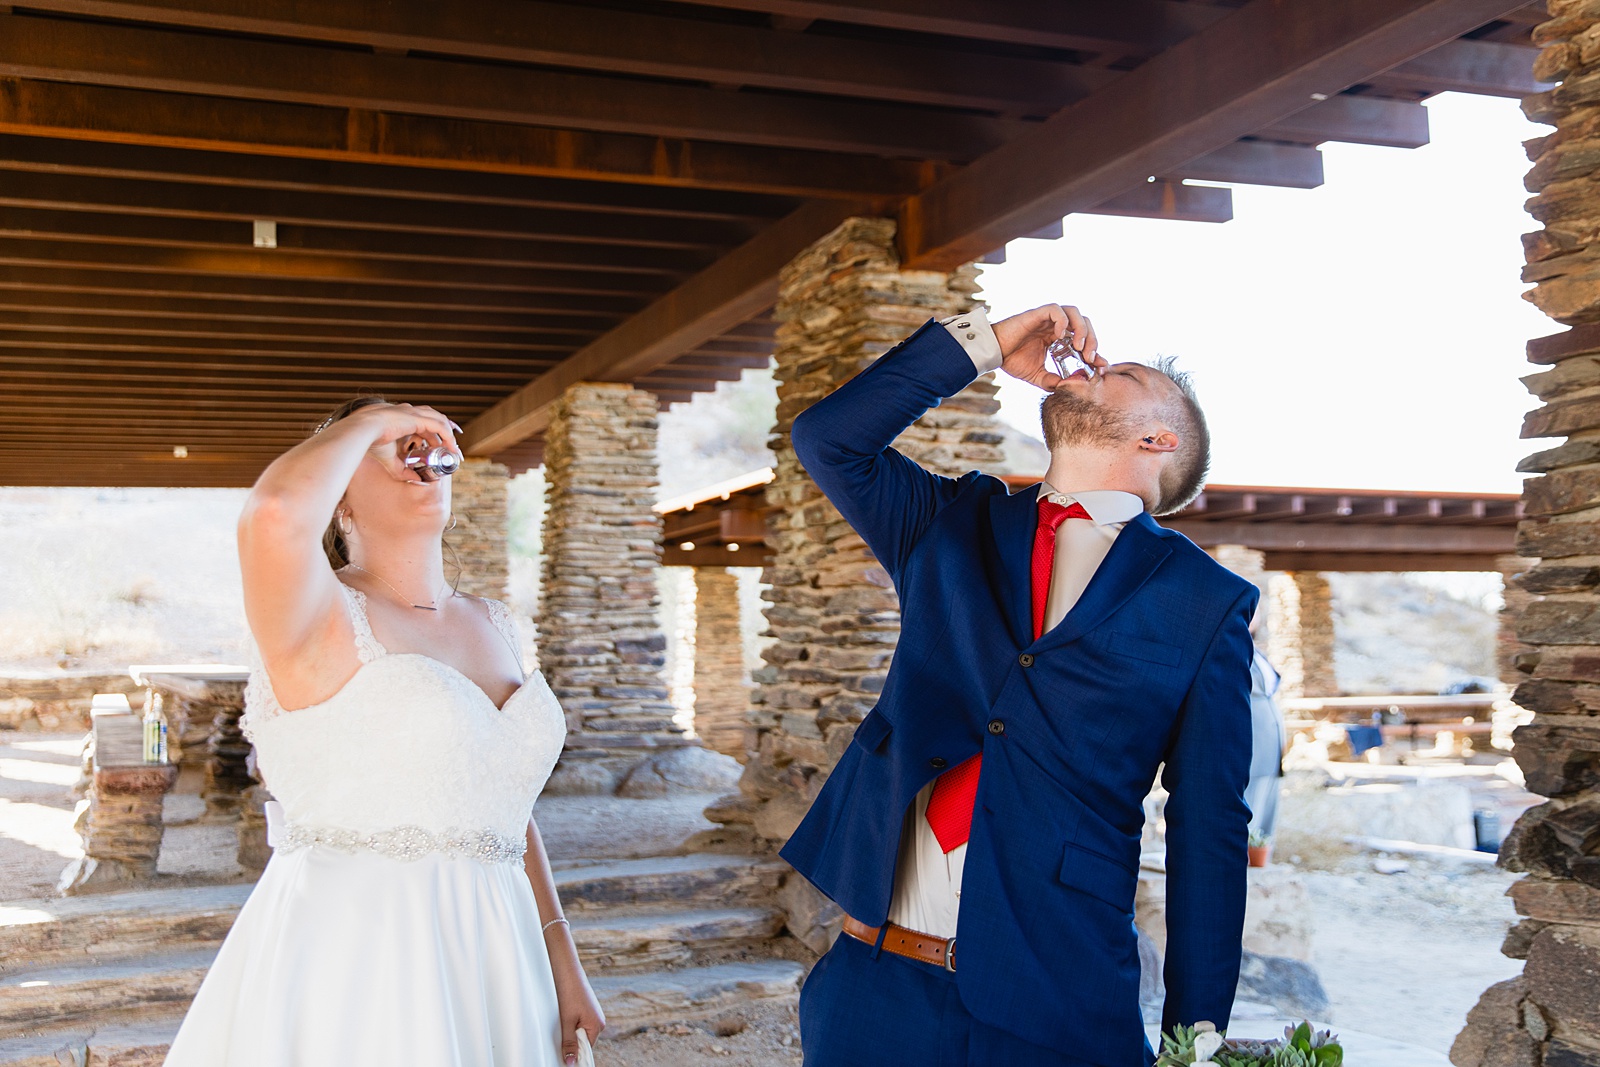 Bride and groom share shots of tequila during their intimate desert wedding ceremony by Phoenix wedding photographer Juniper and Co Photography.